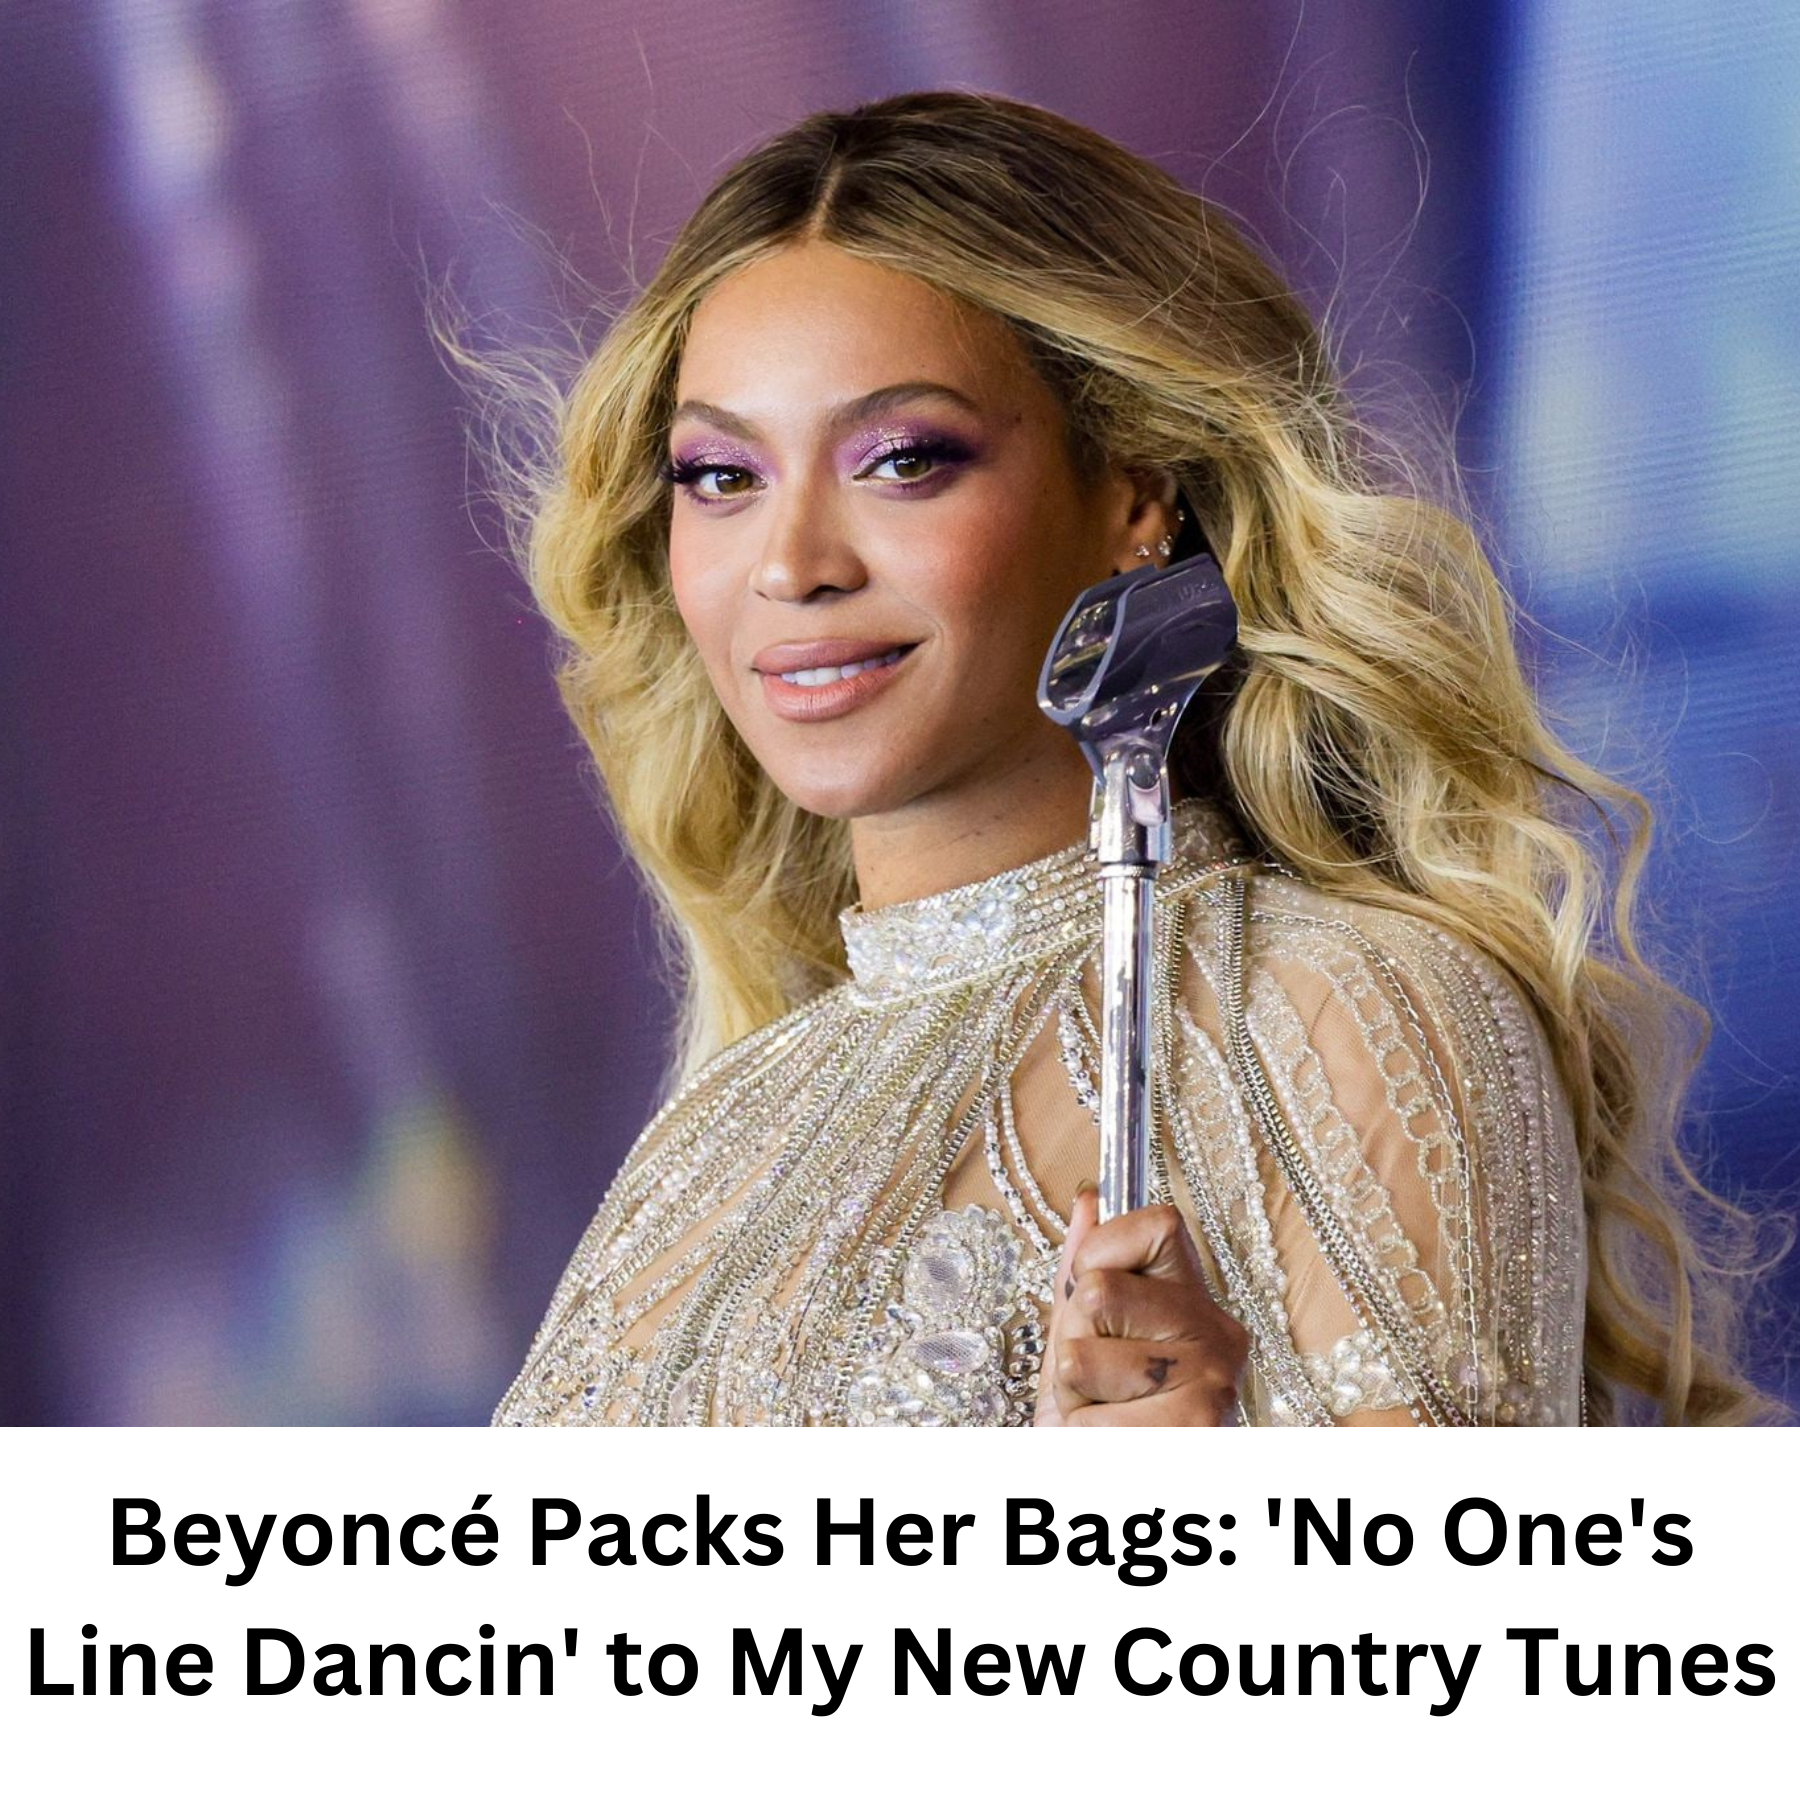 Beyoncé Set to Sing Sayonara: “No One’s Two-Stepping to My Country Tunes!